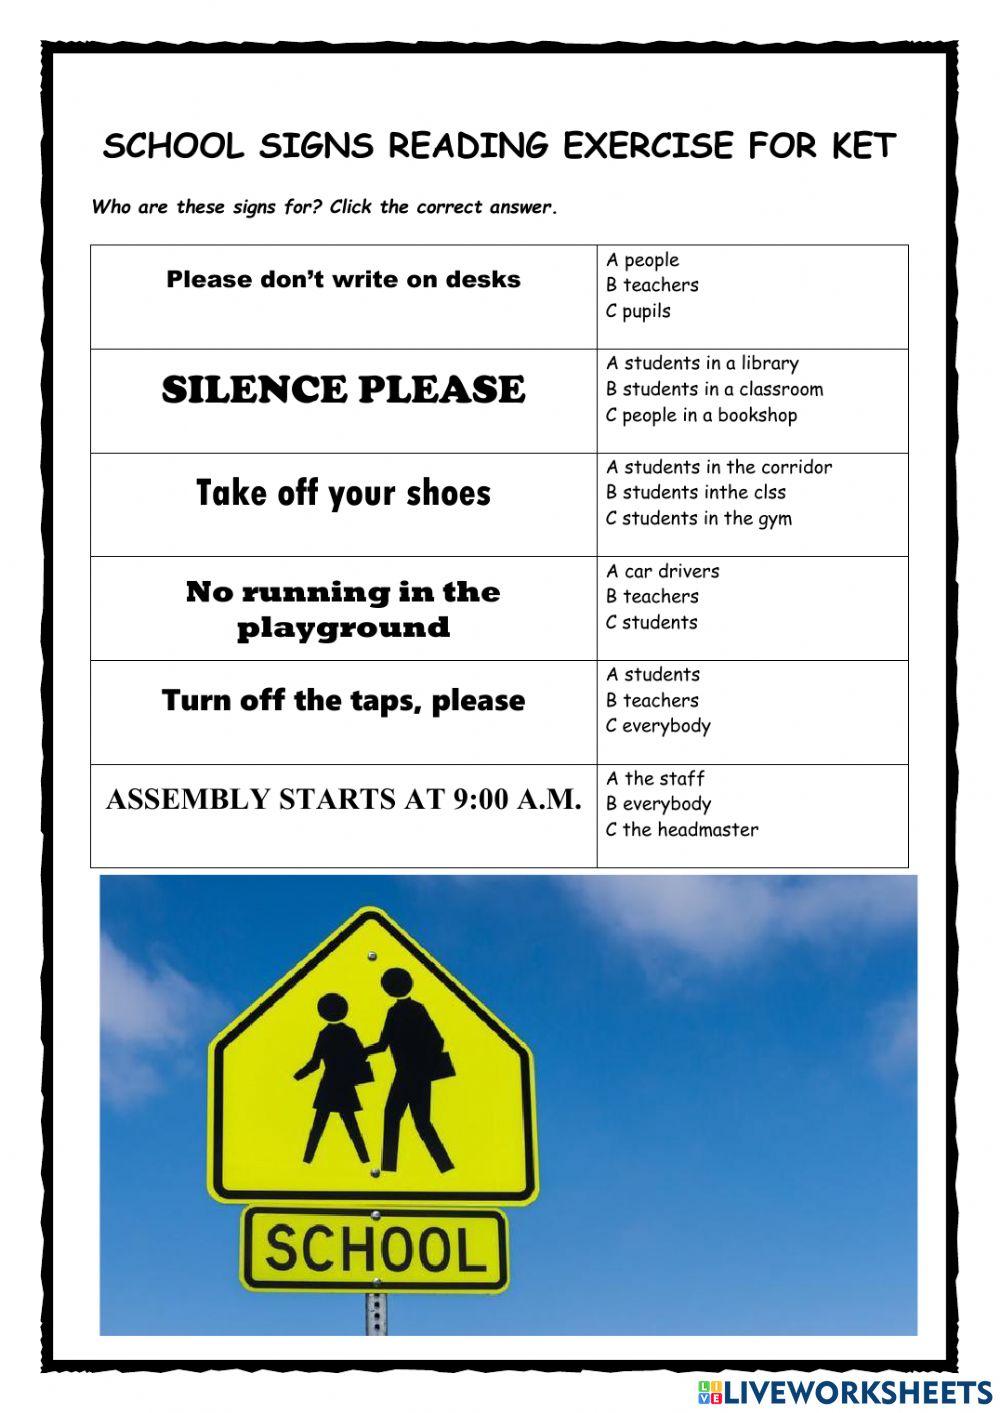 School Signs Reading for KET